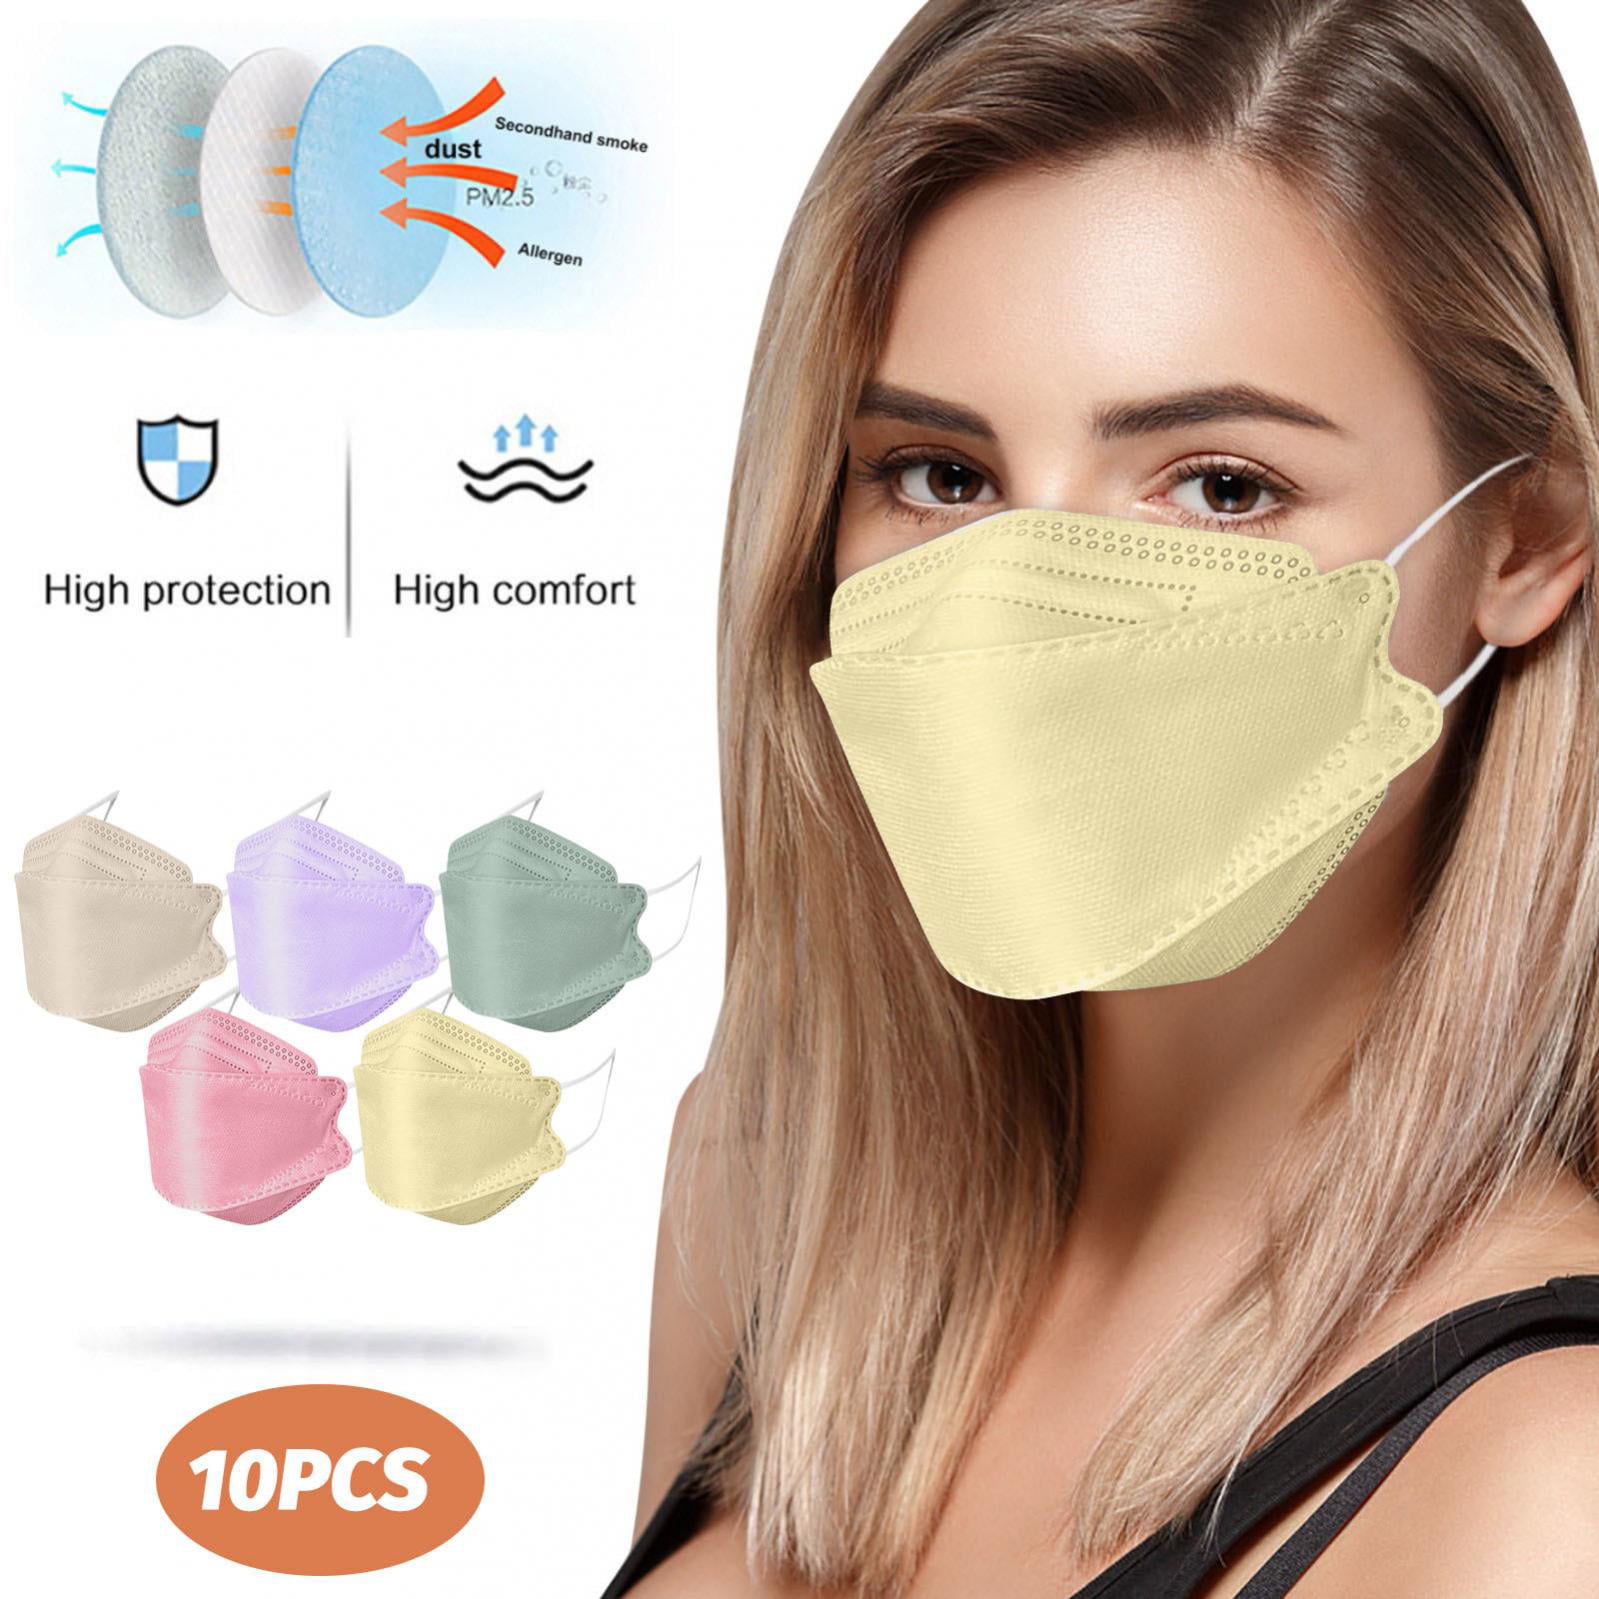 wind fog and dust 10Pcs Good filtering effect can protect the mouth and face from dust cold 